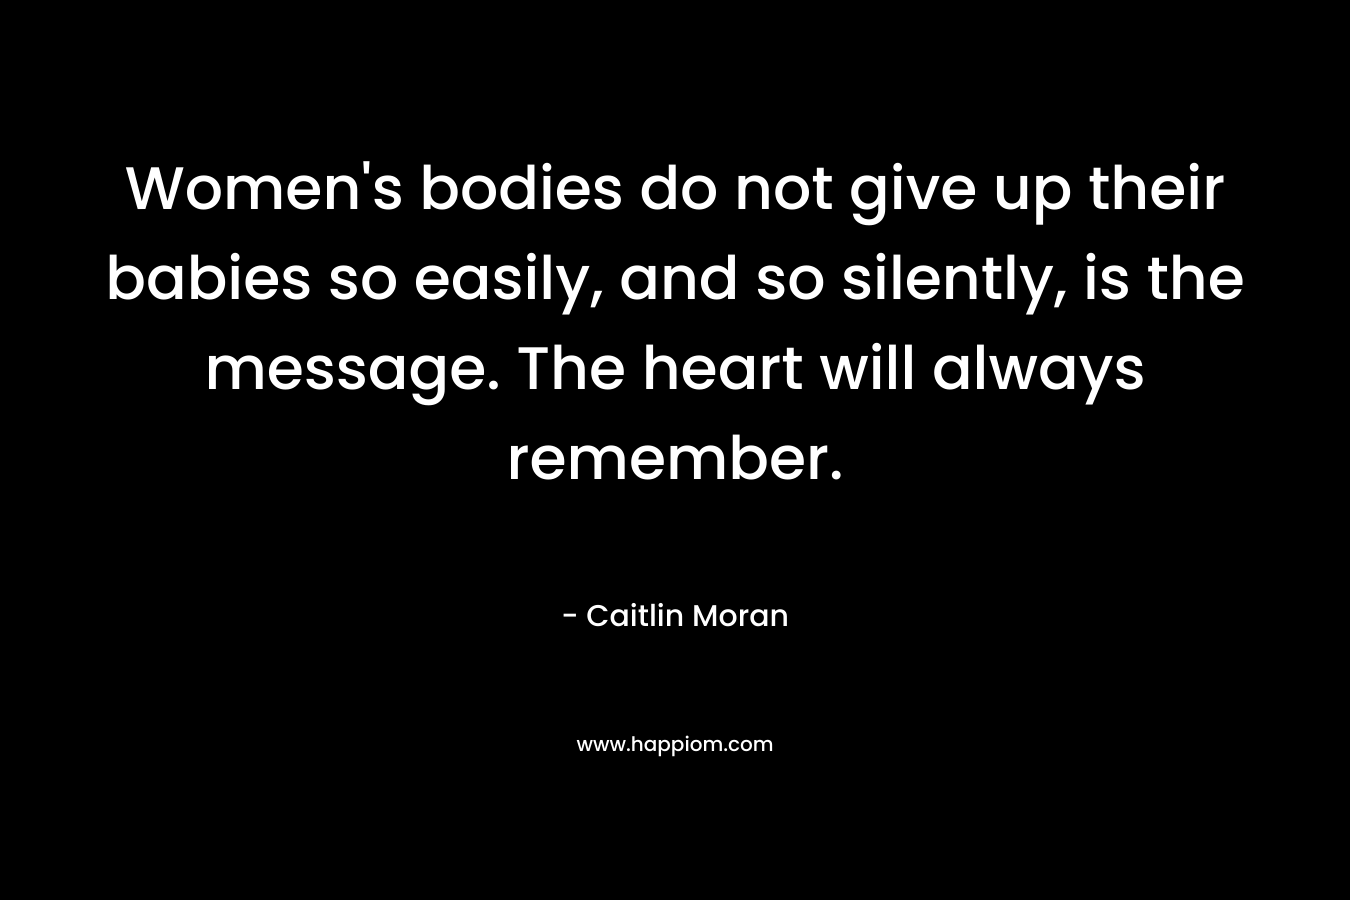 Women's bodies do not give up their babies so easily, and so silently, is the message. The heart will always remember.